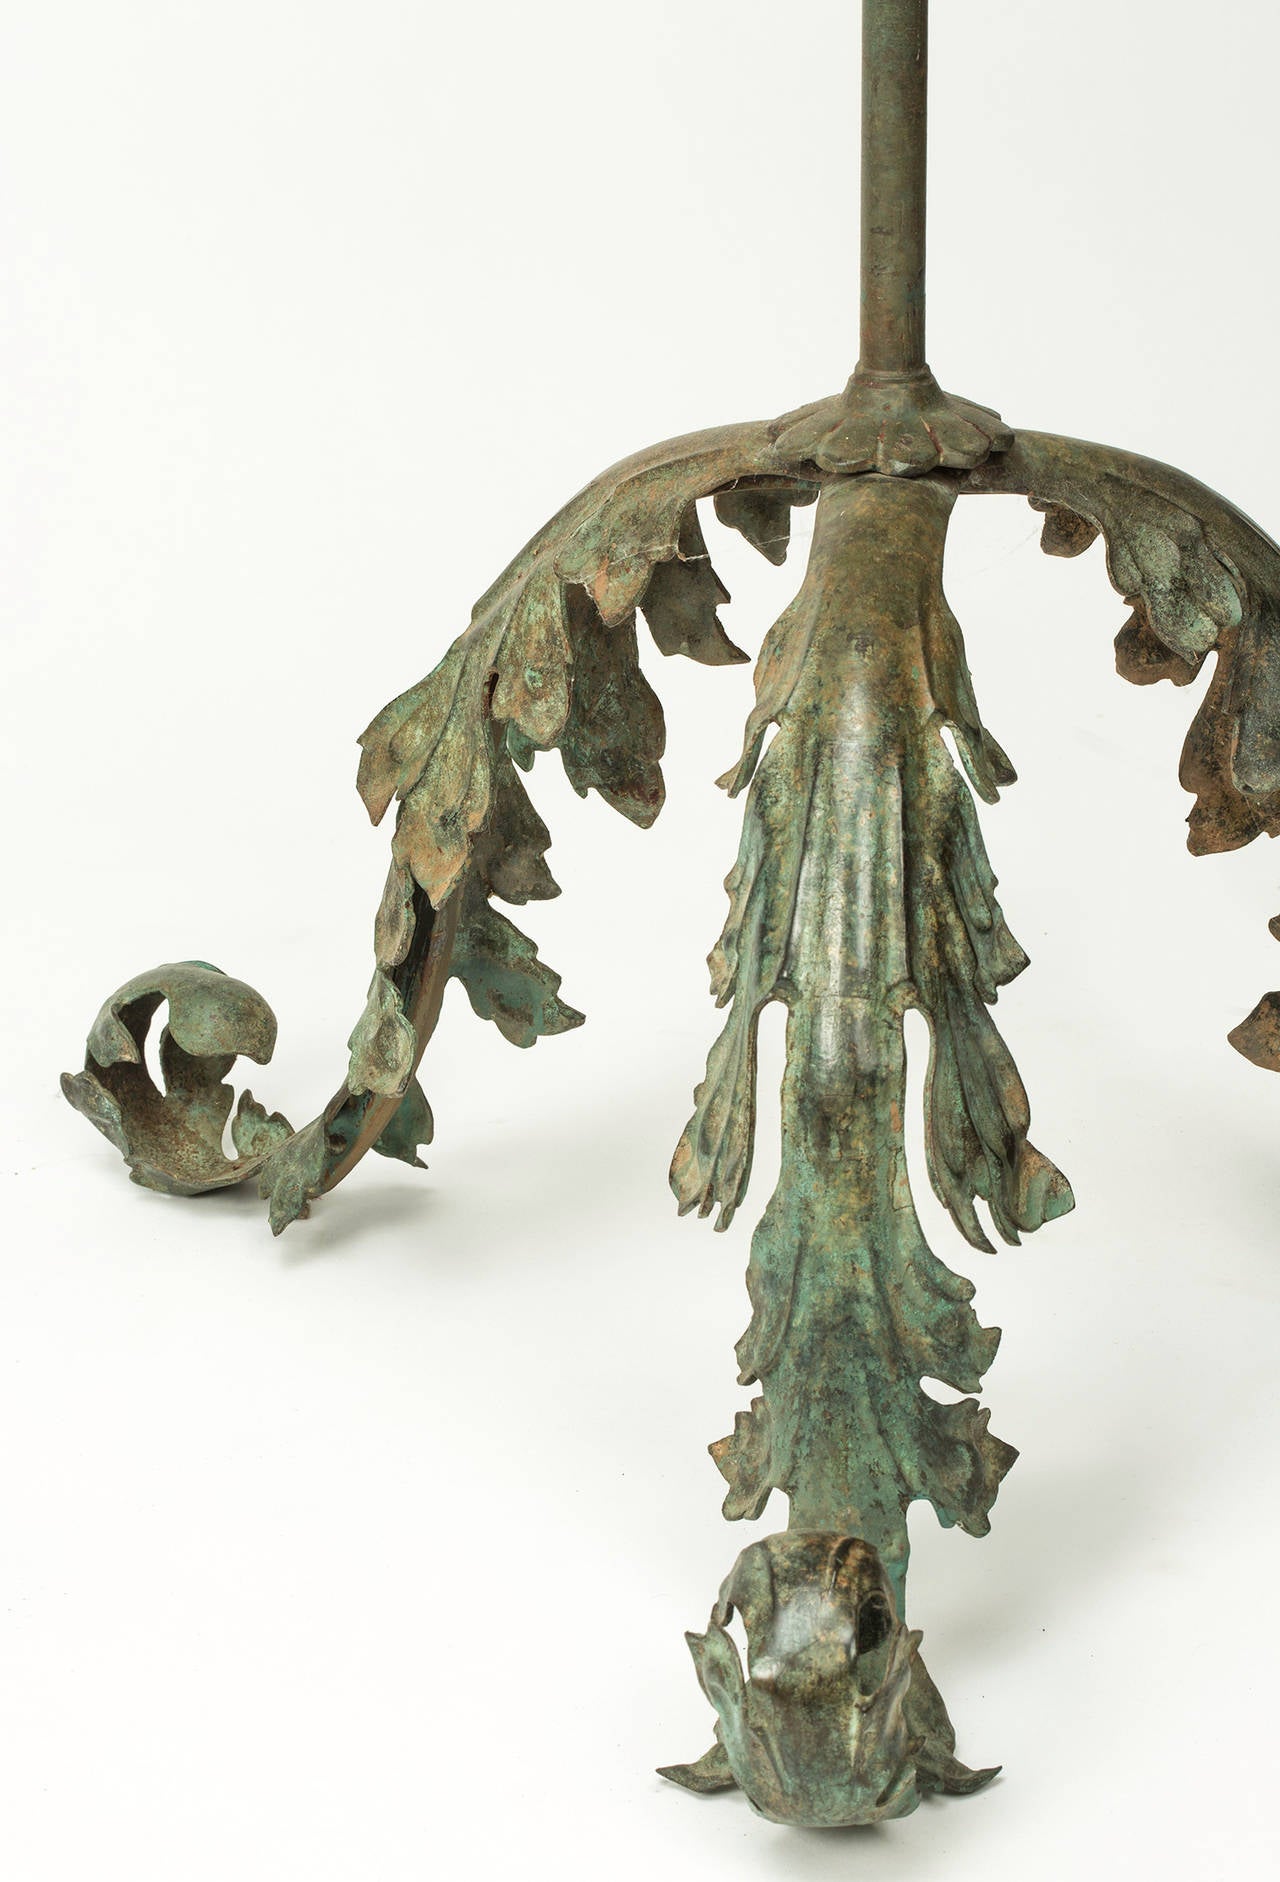 Dramatic pair of floor lamps.  Base support is tripod acanthus leaf motif  in cast bronze.  Contrasted to simple elegant posts also in bronze.  Beautifully   Verdigris finish.  Shades not included.